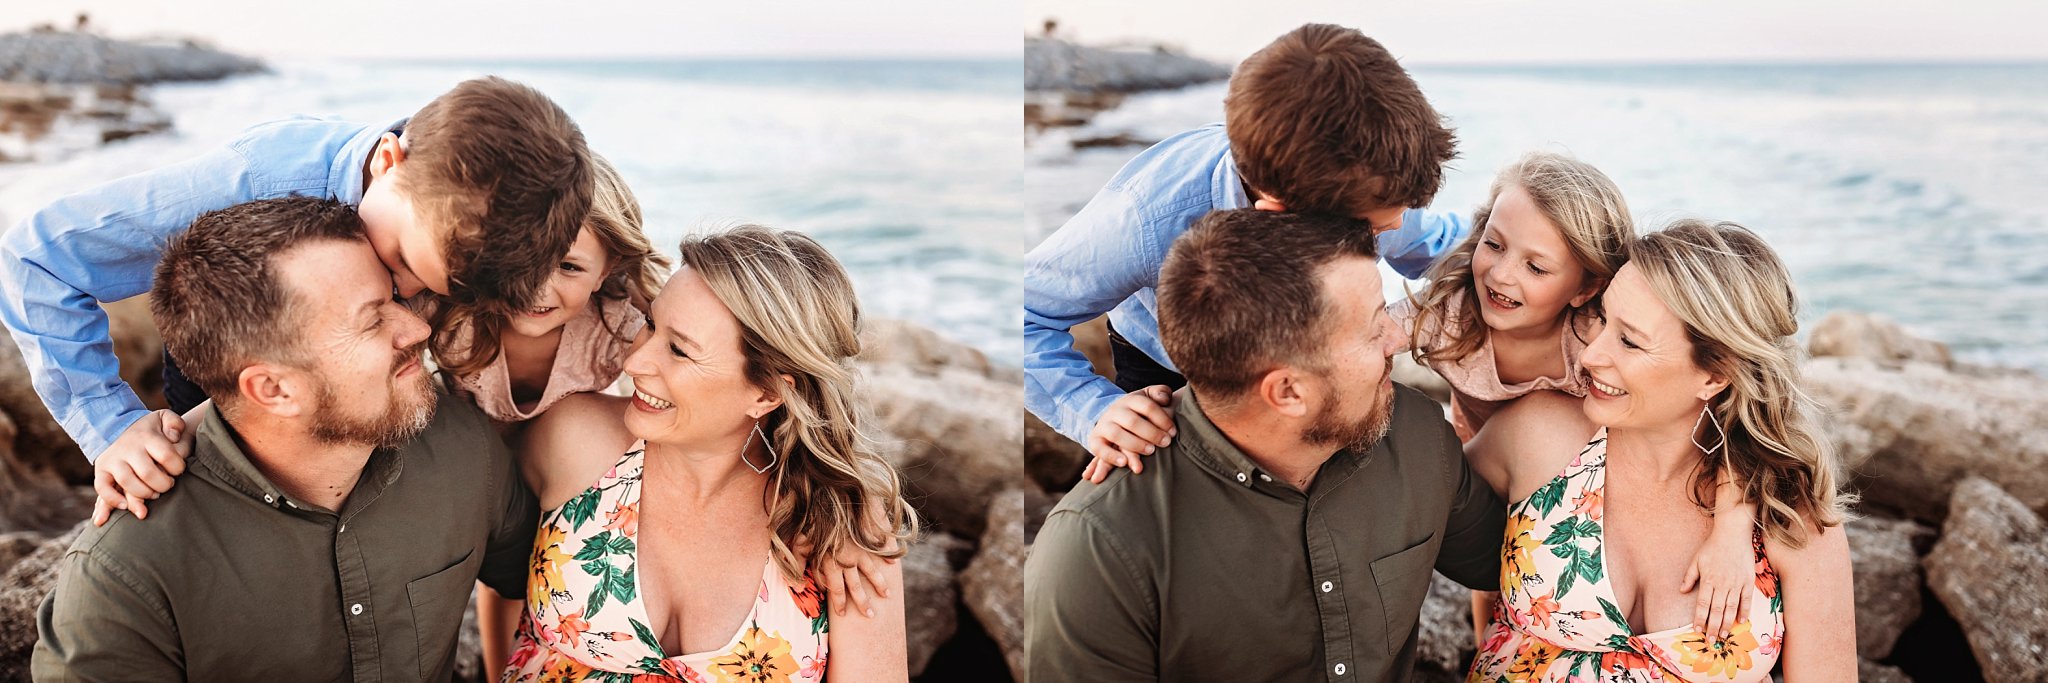 St Augustine Maternity Photographer Washington Oaks Gardens State Park fmaily of 4 laughing while sitting on rocky beach